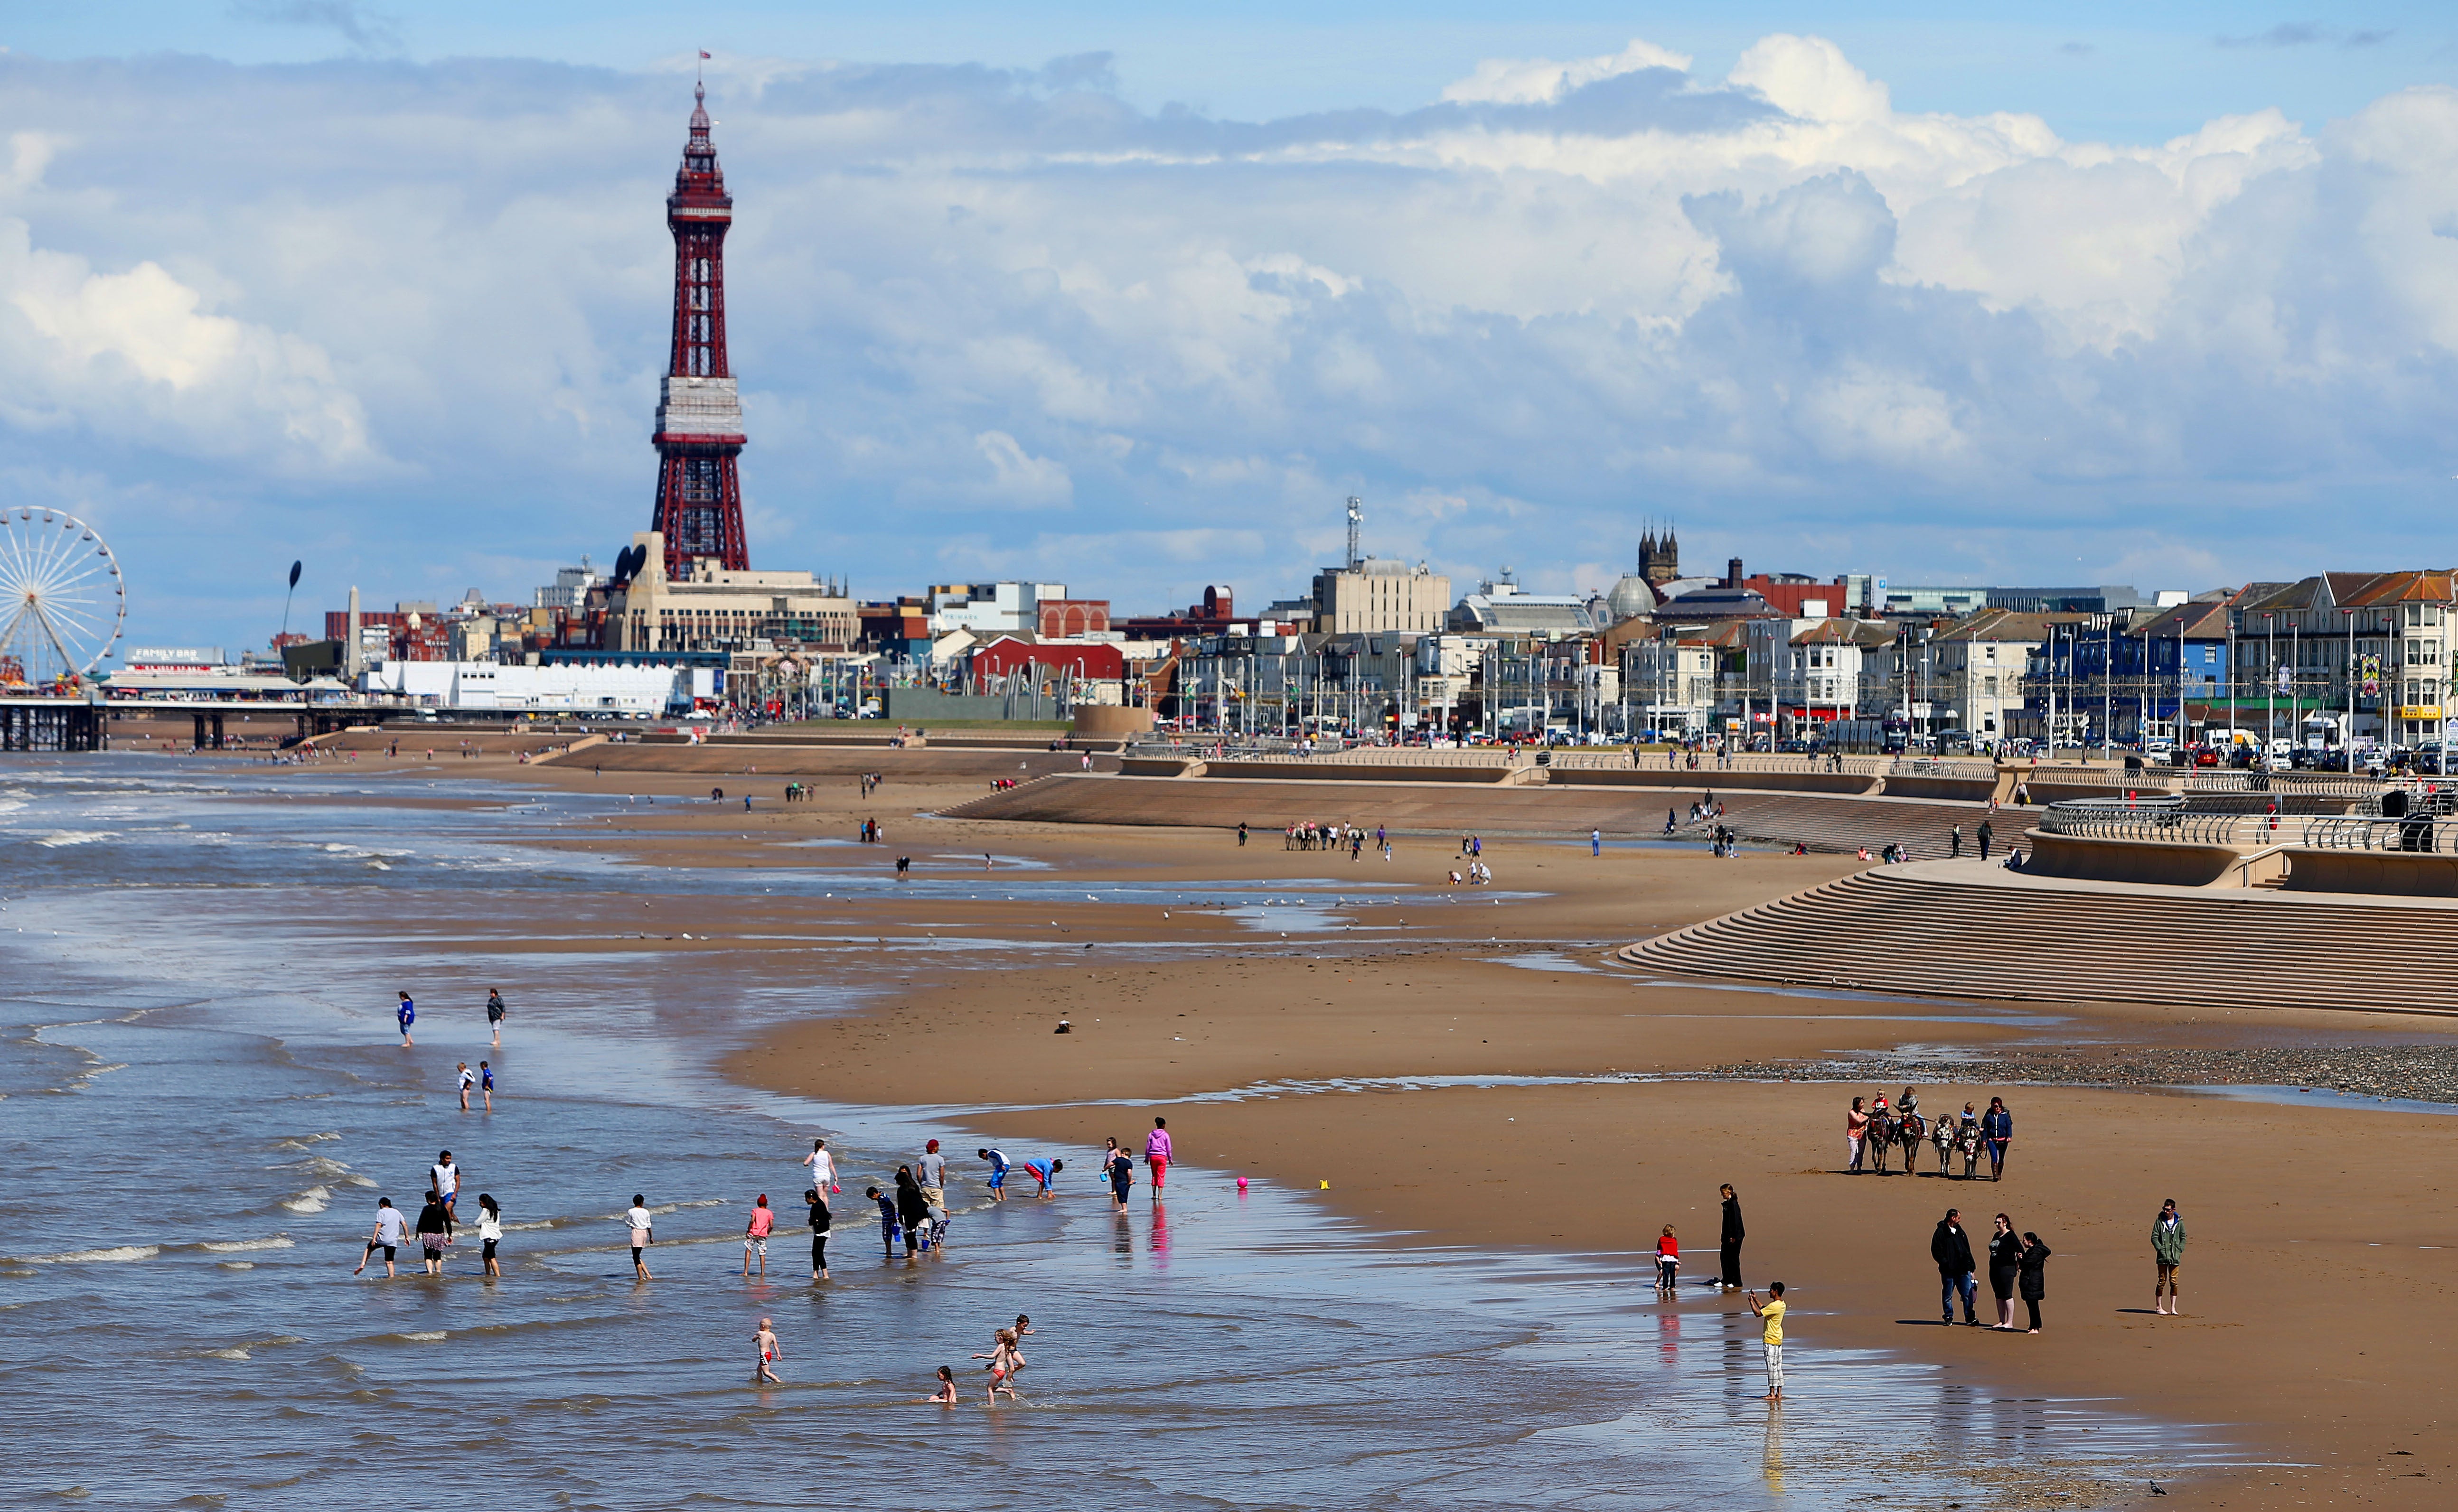 Blackpool Council leader Lynn Williams called the situation ‘appalling’ as the town prepares for the height of its tourist season (Peter Byrne/PA)